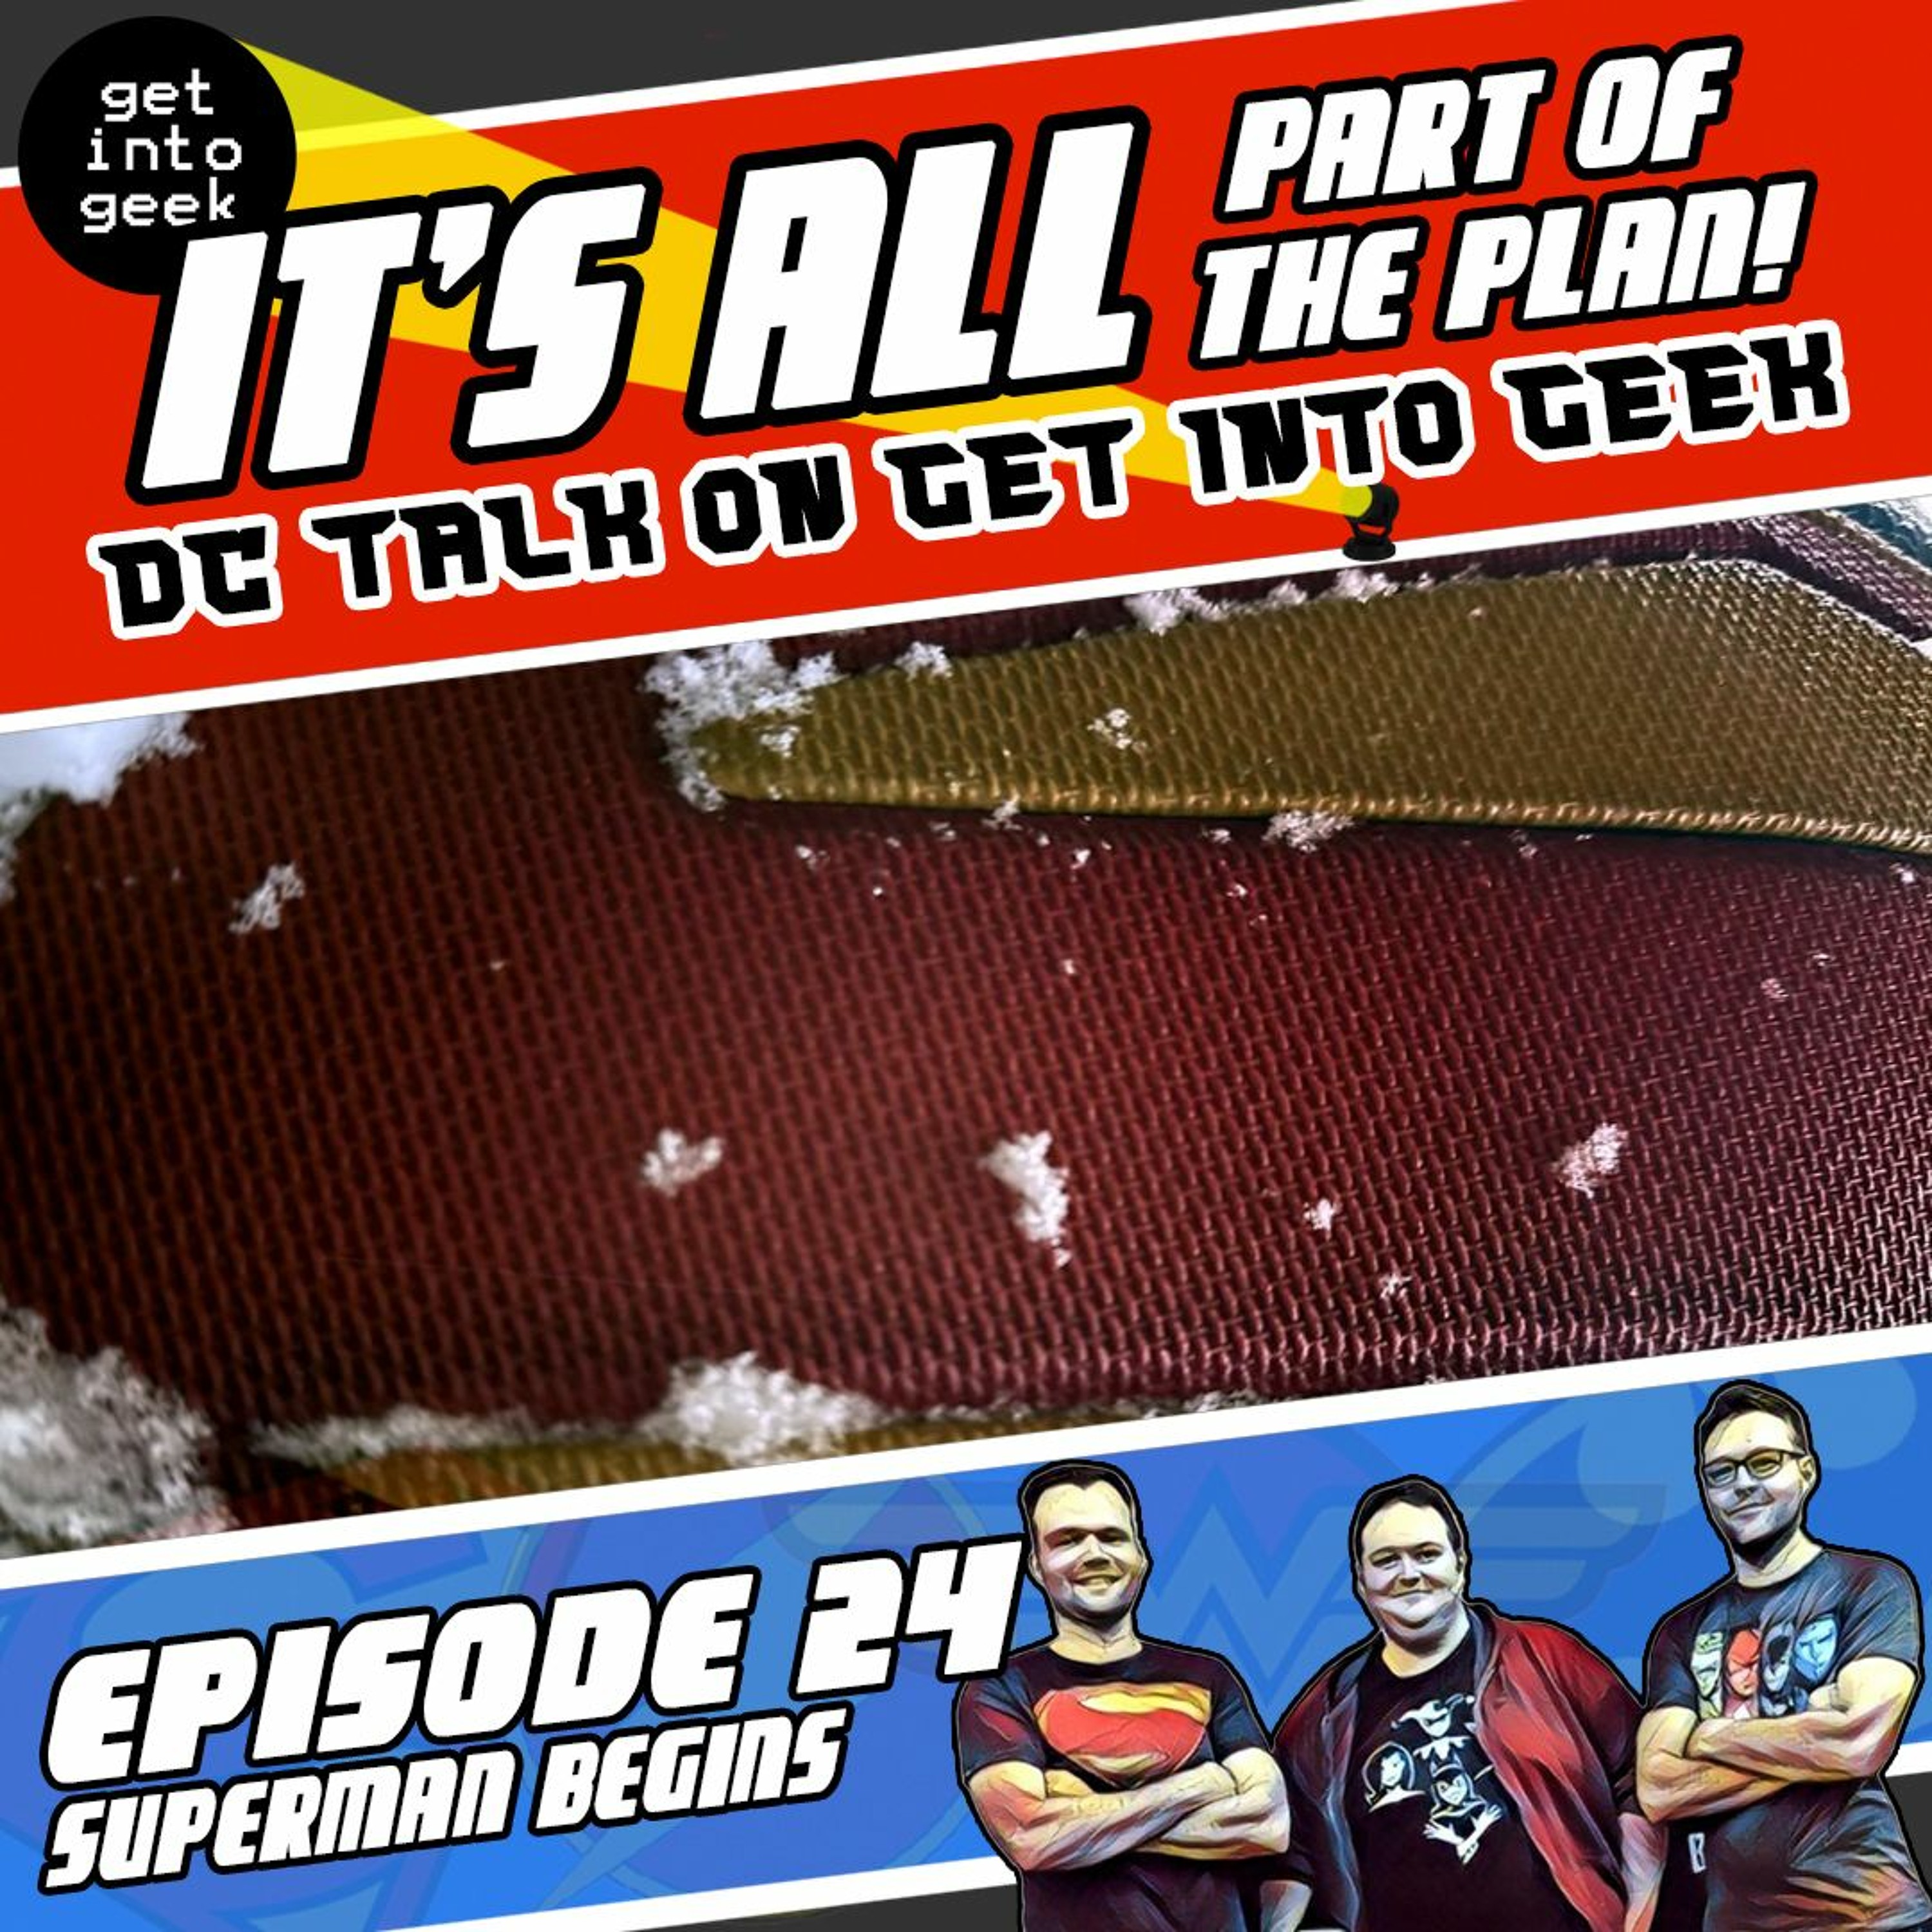 Superman Begins (It's All Part Of The Plan - DC Talk Episode 1.24)